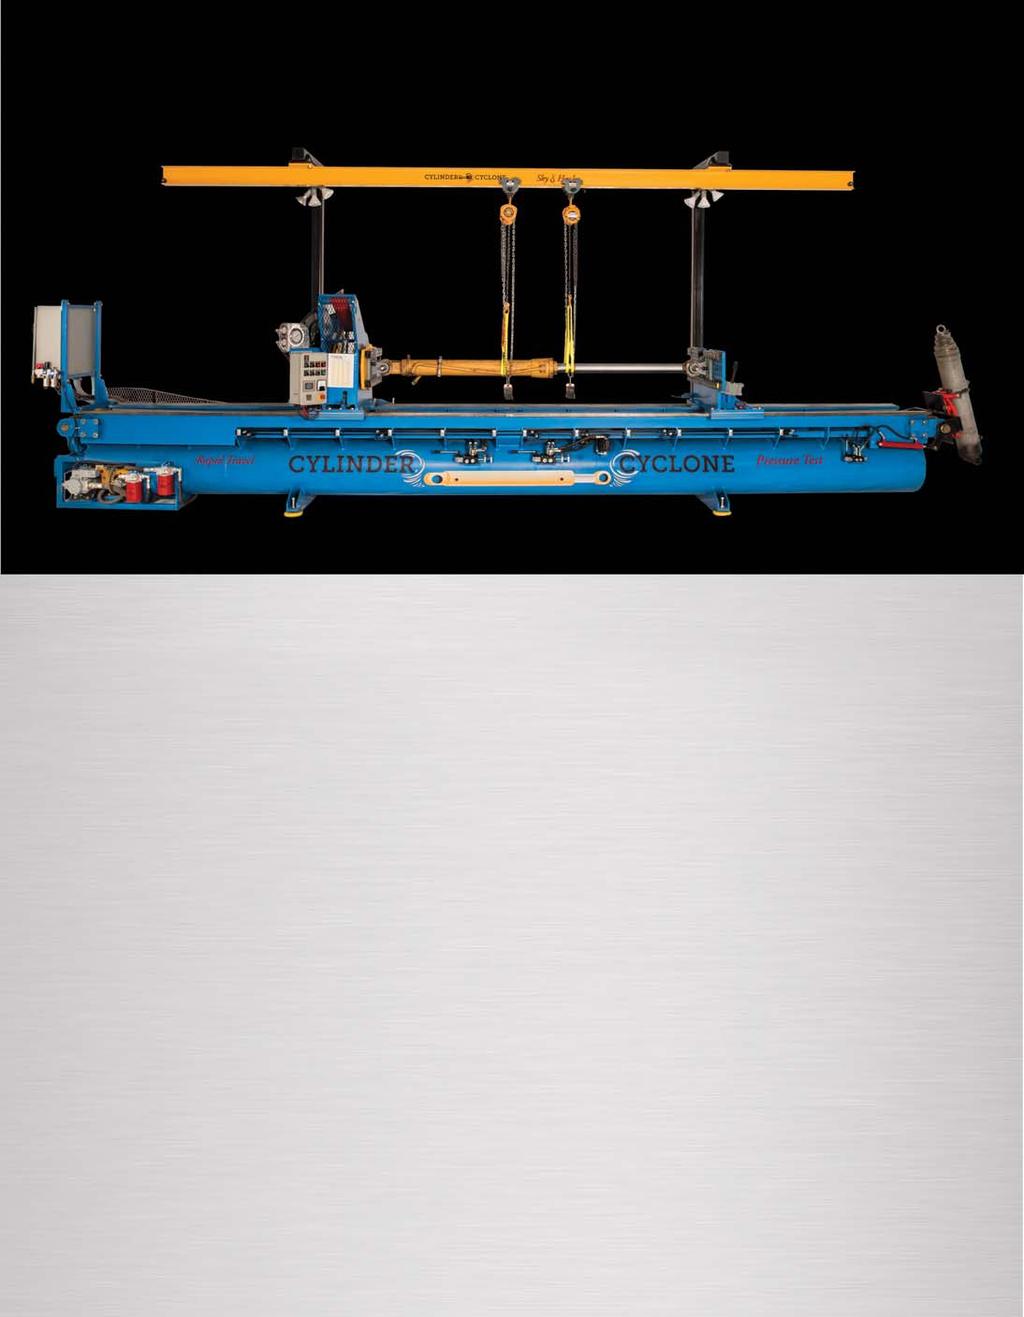 MACHINE SPECIFICATIONS Machine Specifications for the CC-2050-RPS Dimensions 27 long, 54" wide, and 10 6" high (with Sky Hook) Operating specifications 12" radius swing and 20 center to center